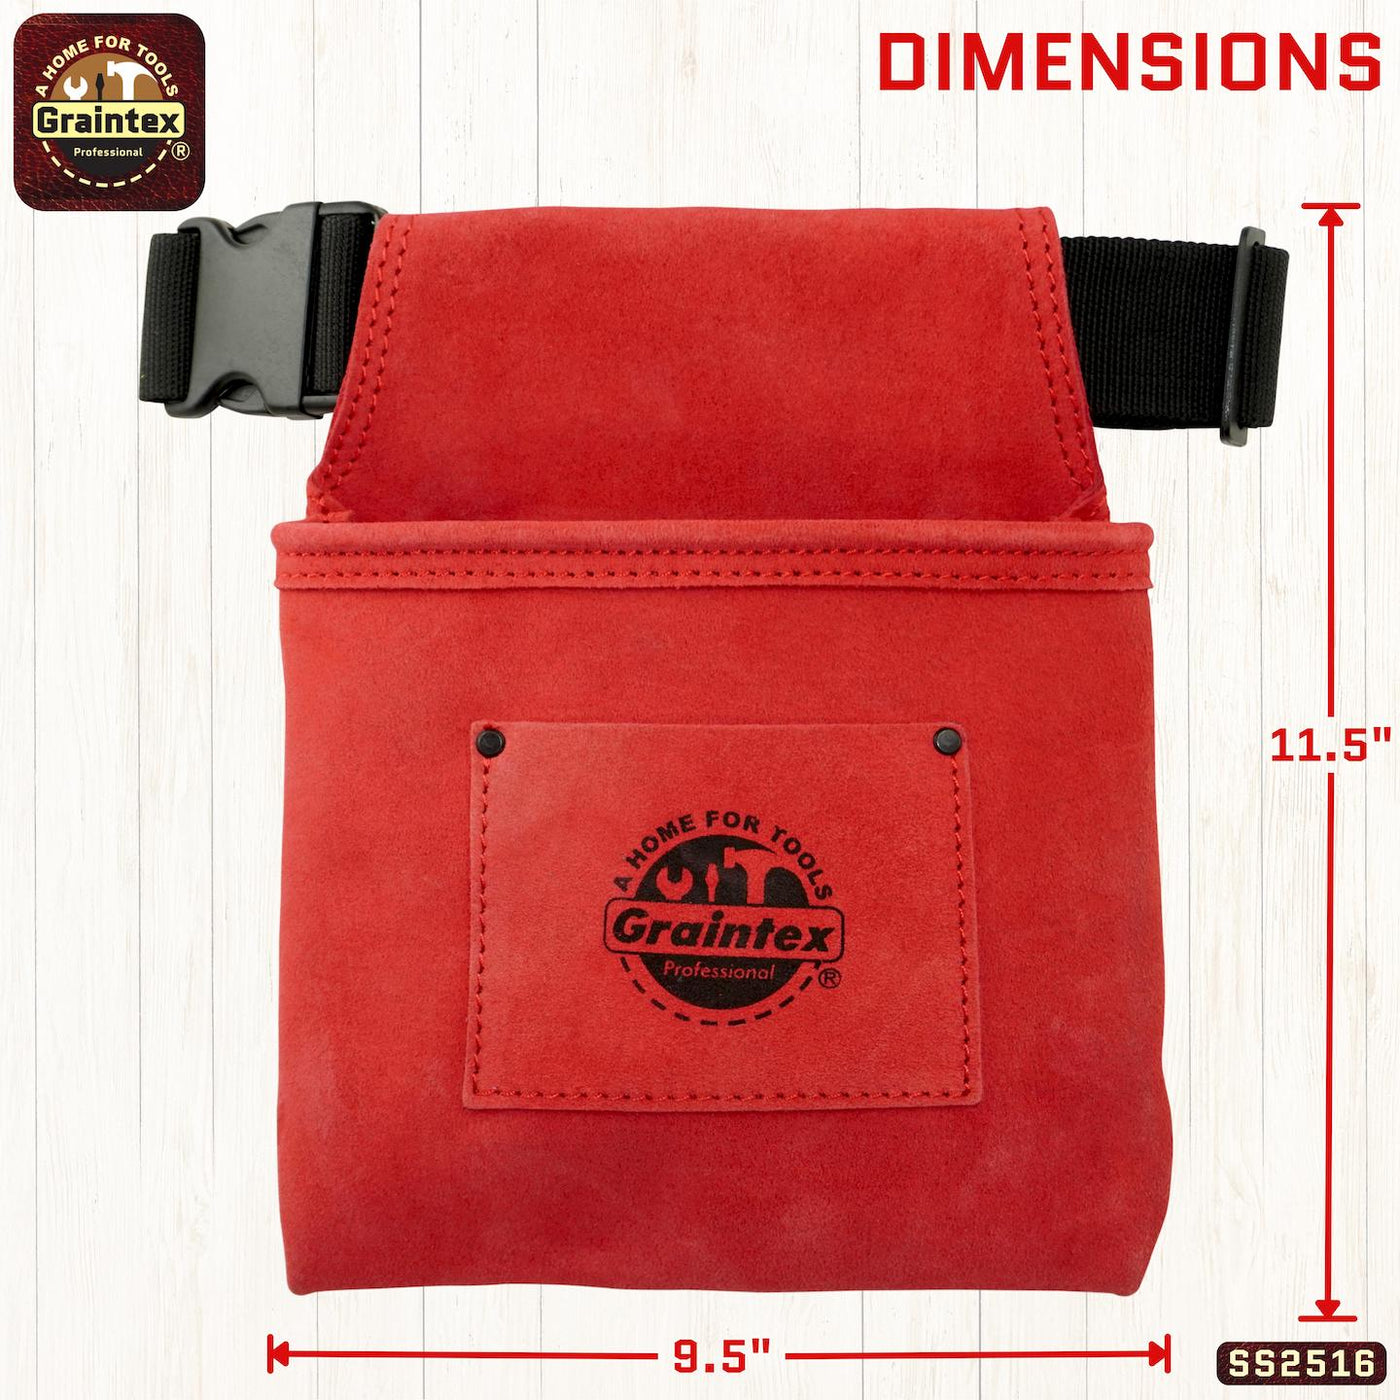 SS2516 :: 1 Pocket Nail & Tool Pouch Red Color Suede Leather with Belt